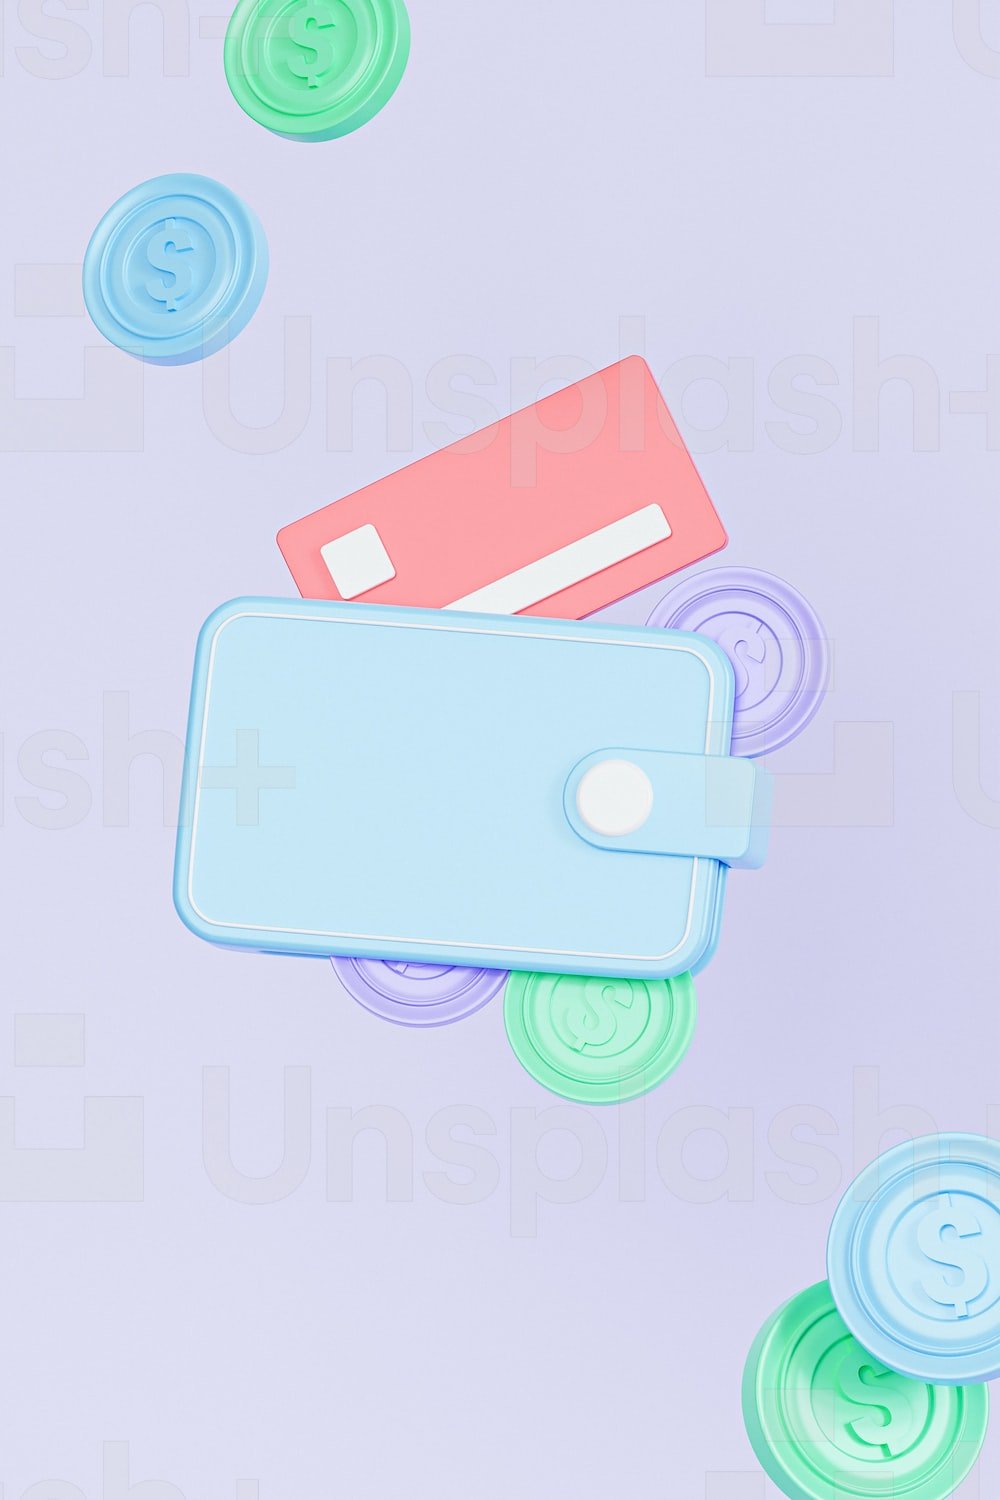 Bank Card Picture. Download Free Image